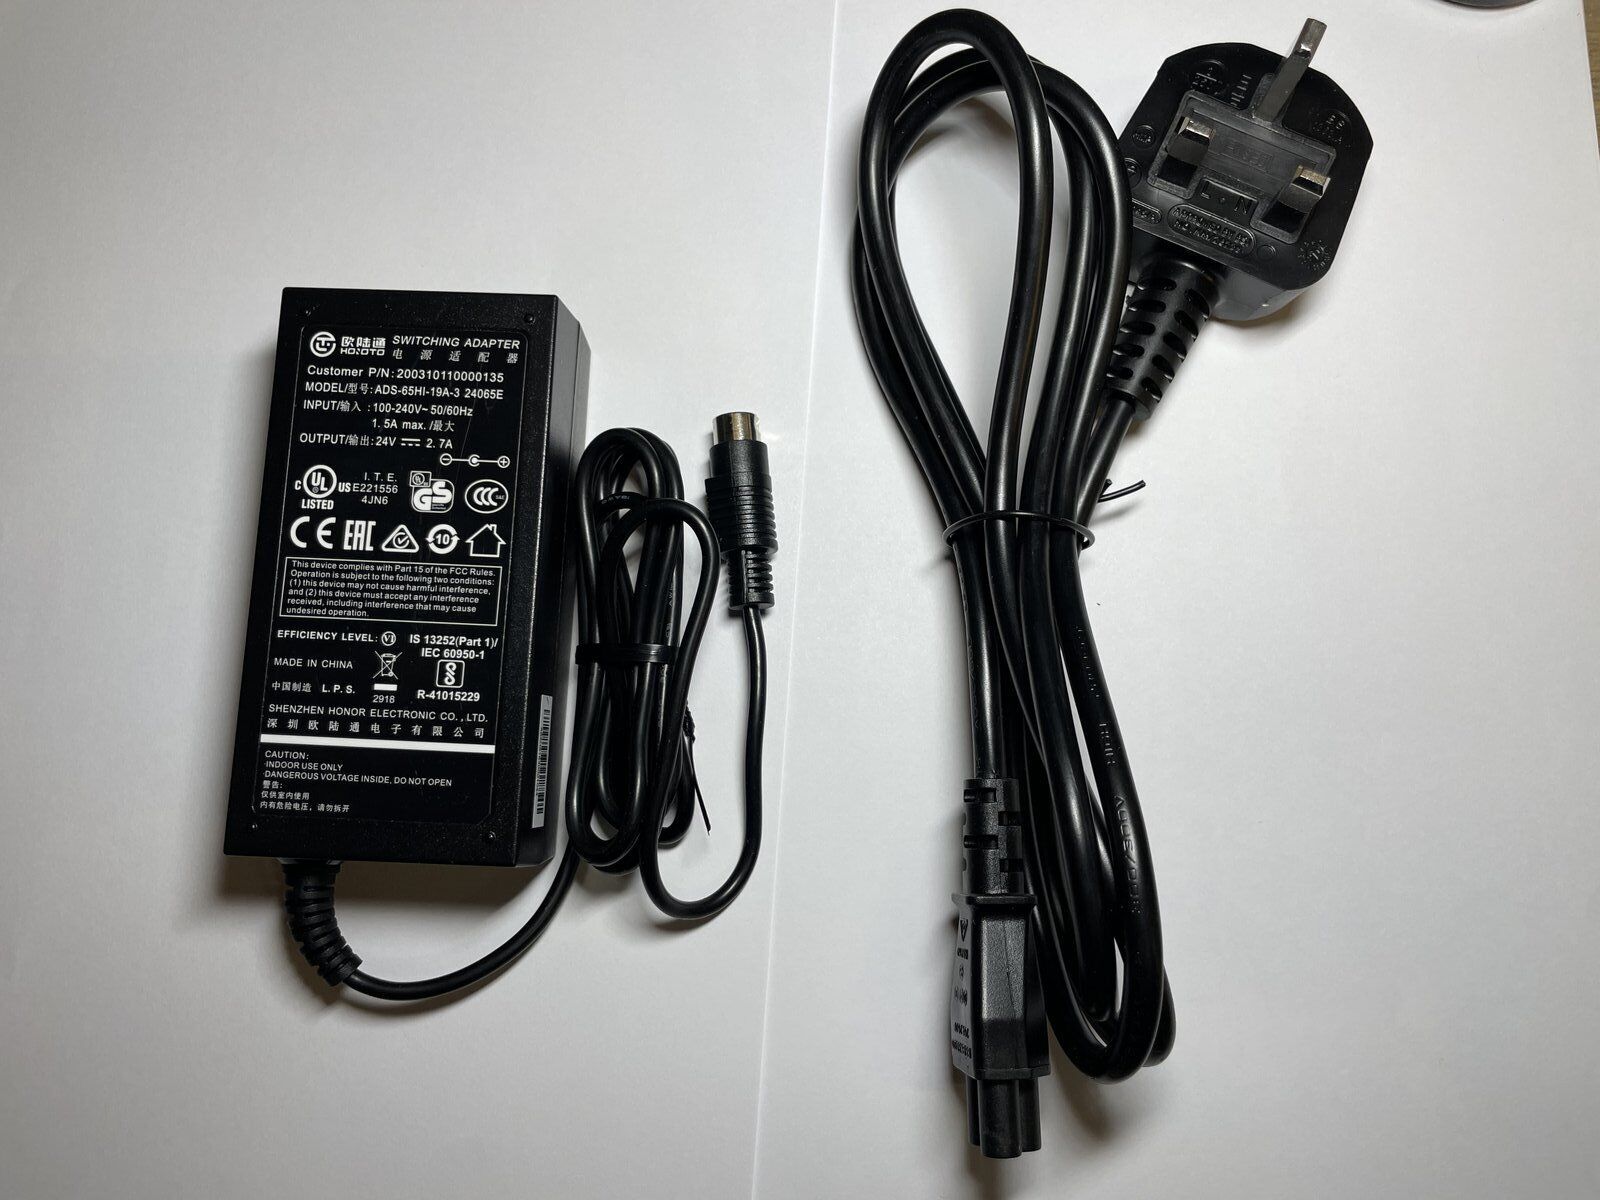 Replacement for 24V 2.15A DA-52B24 PS60A-24C PS60A-24B AC Adapter for Star SP298 Bundled Items Power Cable EAN 50594243